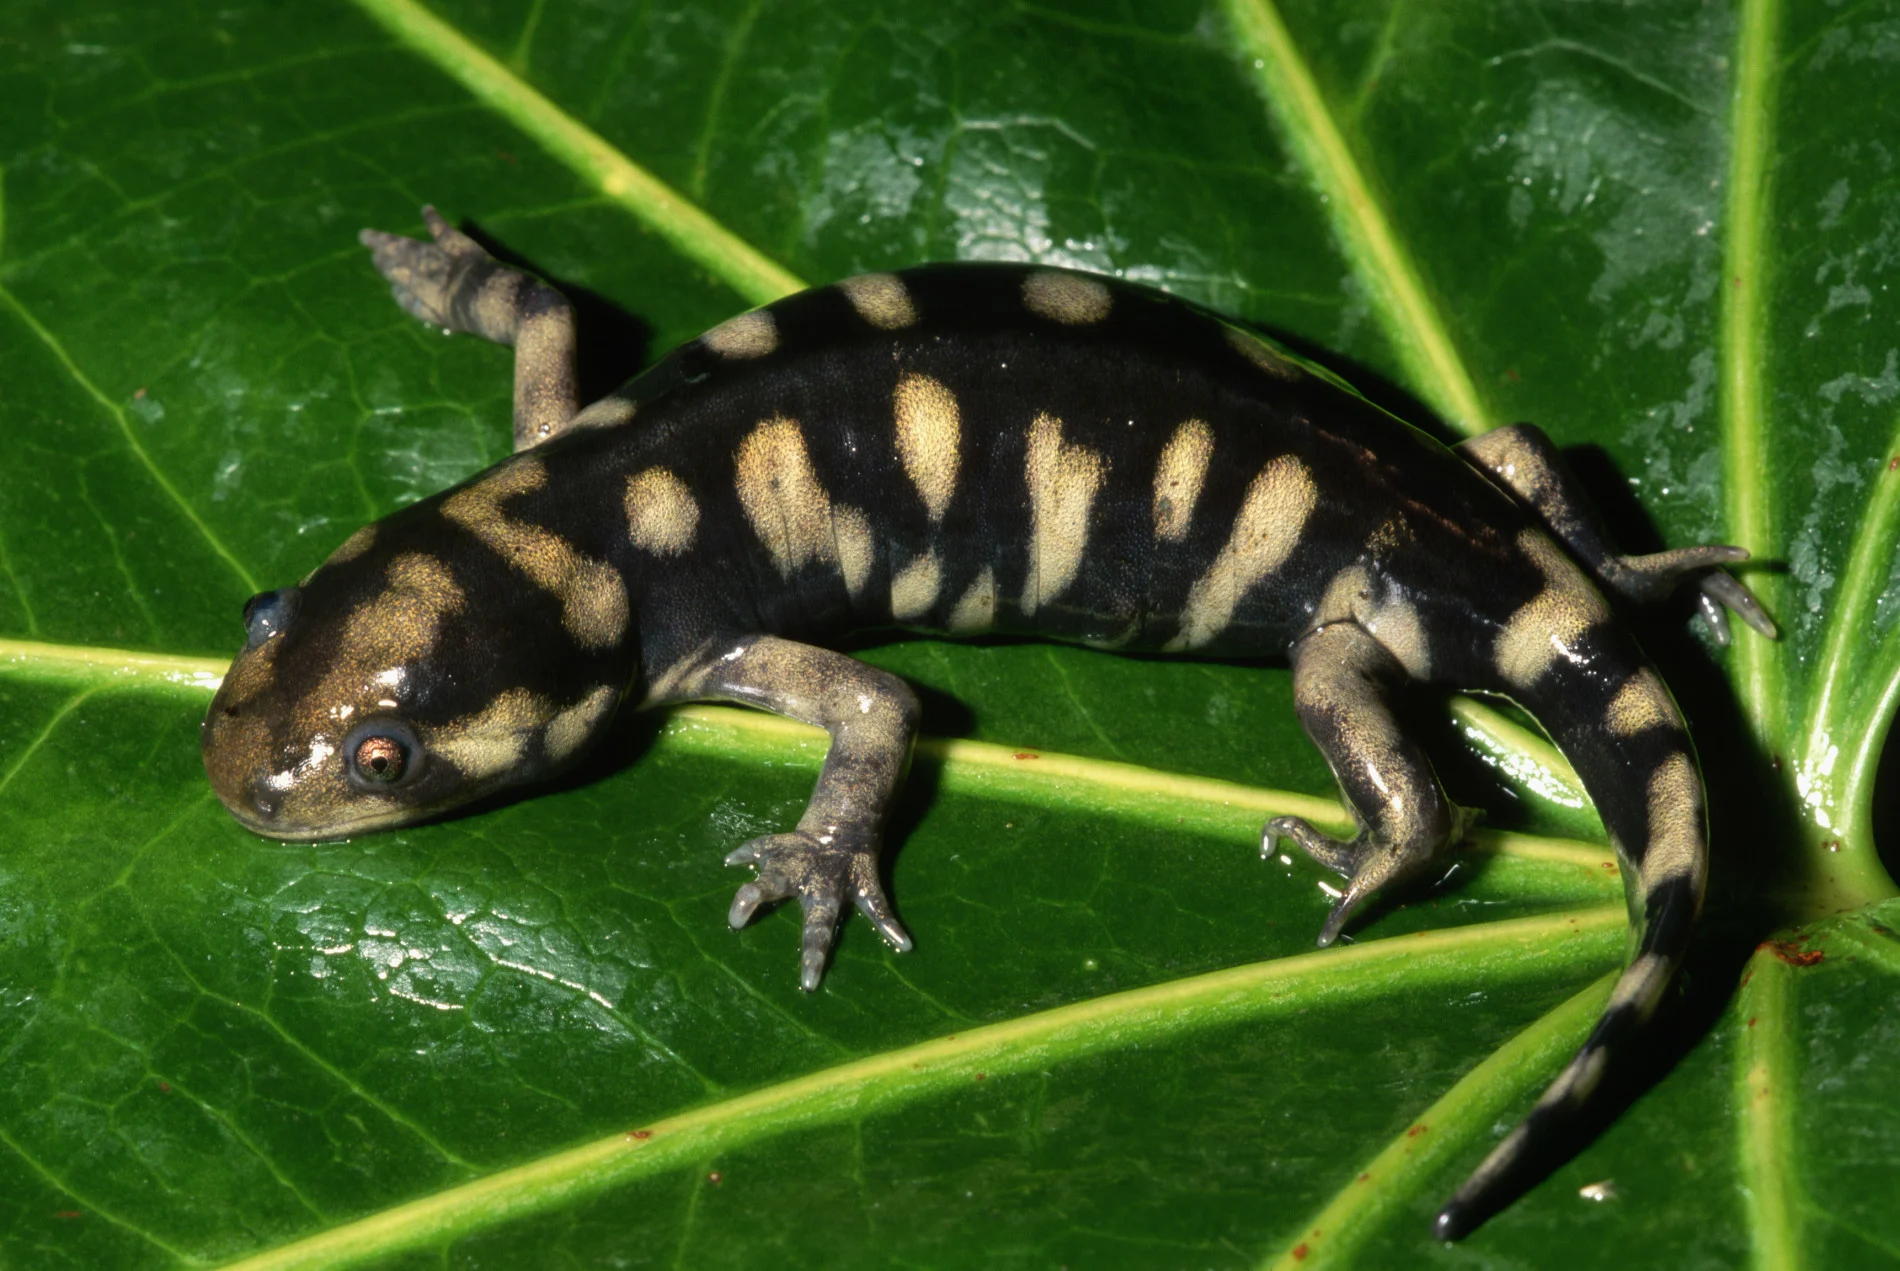 Salamander virus may provide hints about future climate change, study says